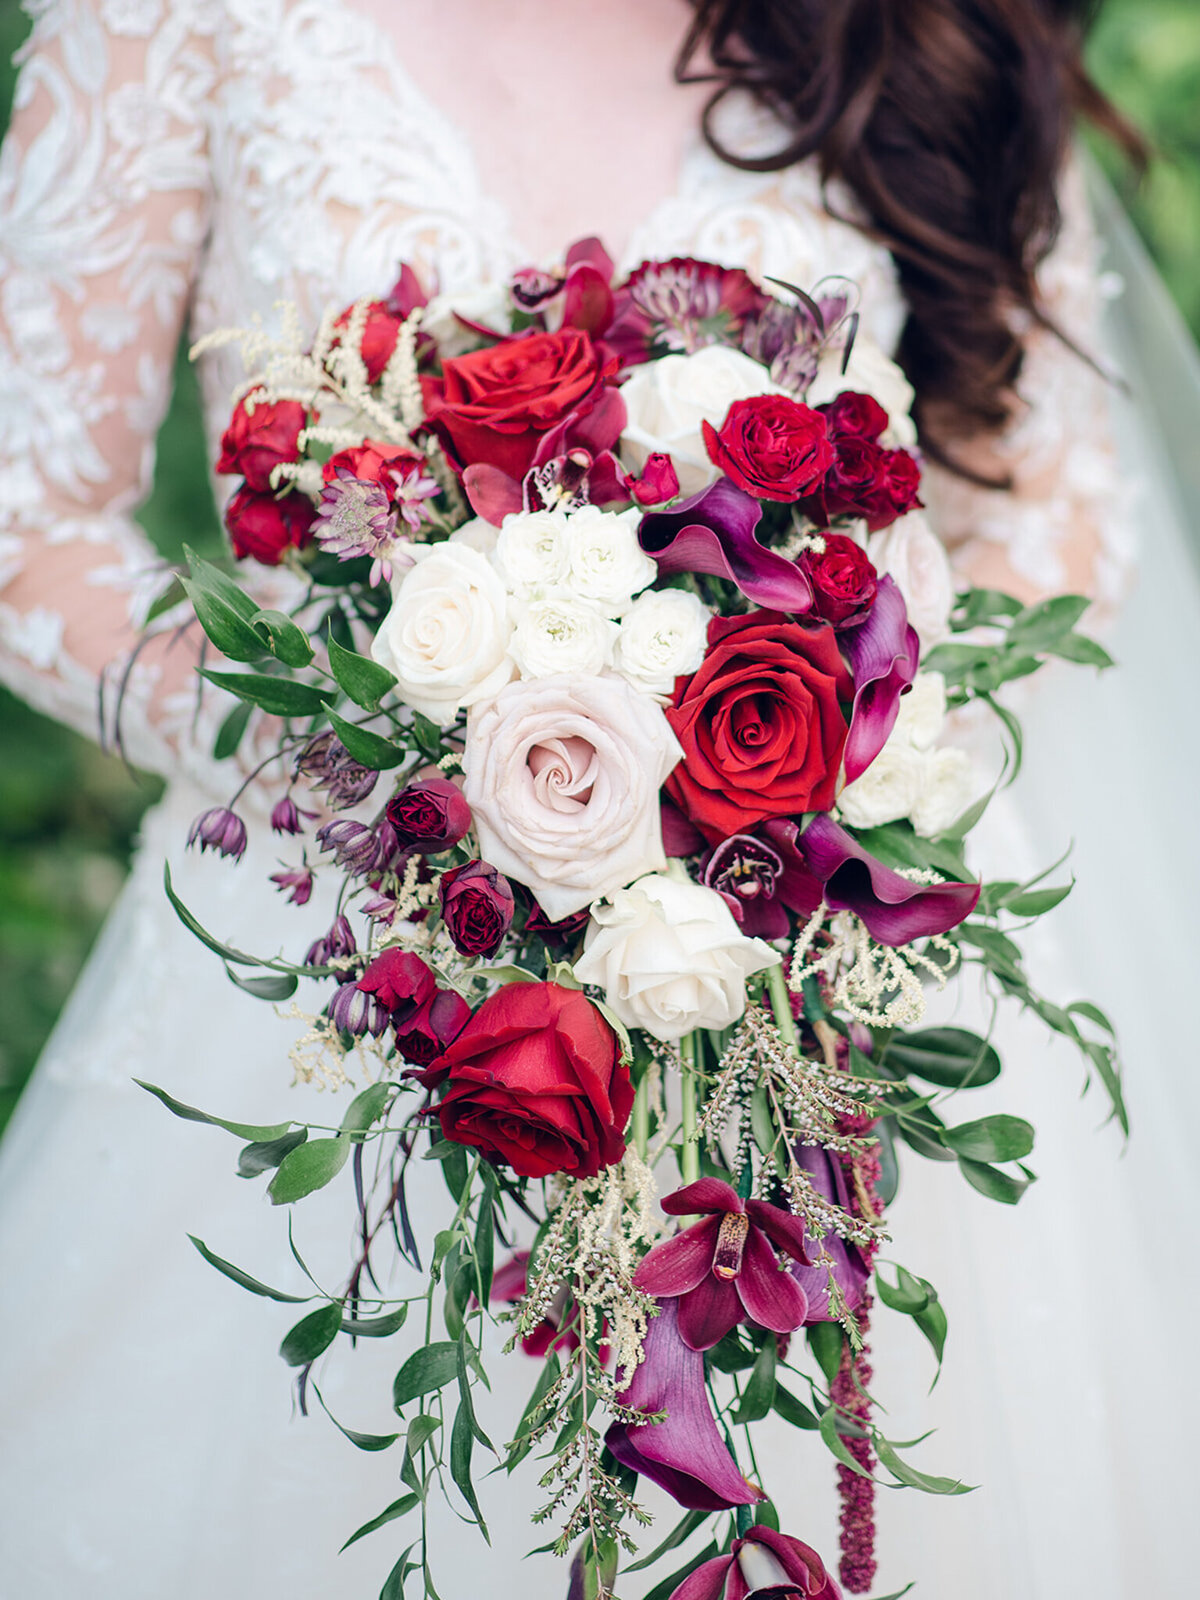 Stunning cascading bouquet of red and white roses by Flower Aura By Natasha, classic Calgary, Alberta wedding florist, featured on the Brontë Bride Vendor Guide.